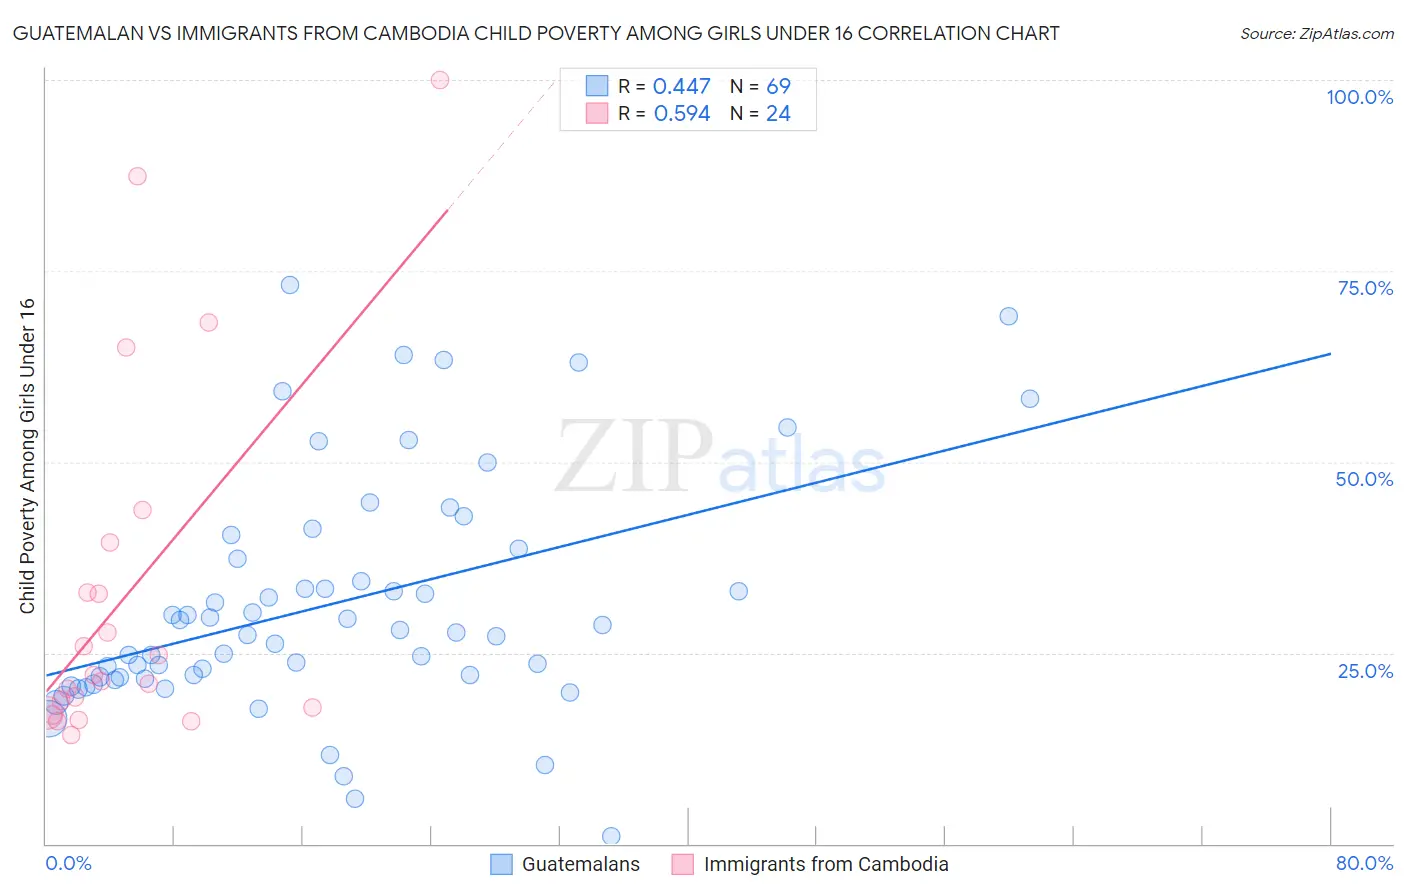 Guatemalan vs Immigrants from Cambodia Child Poverty Among Girls Under 16